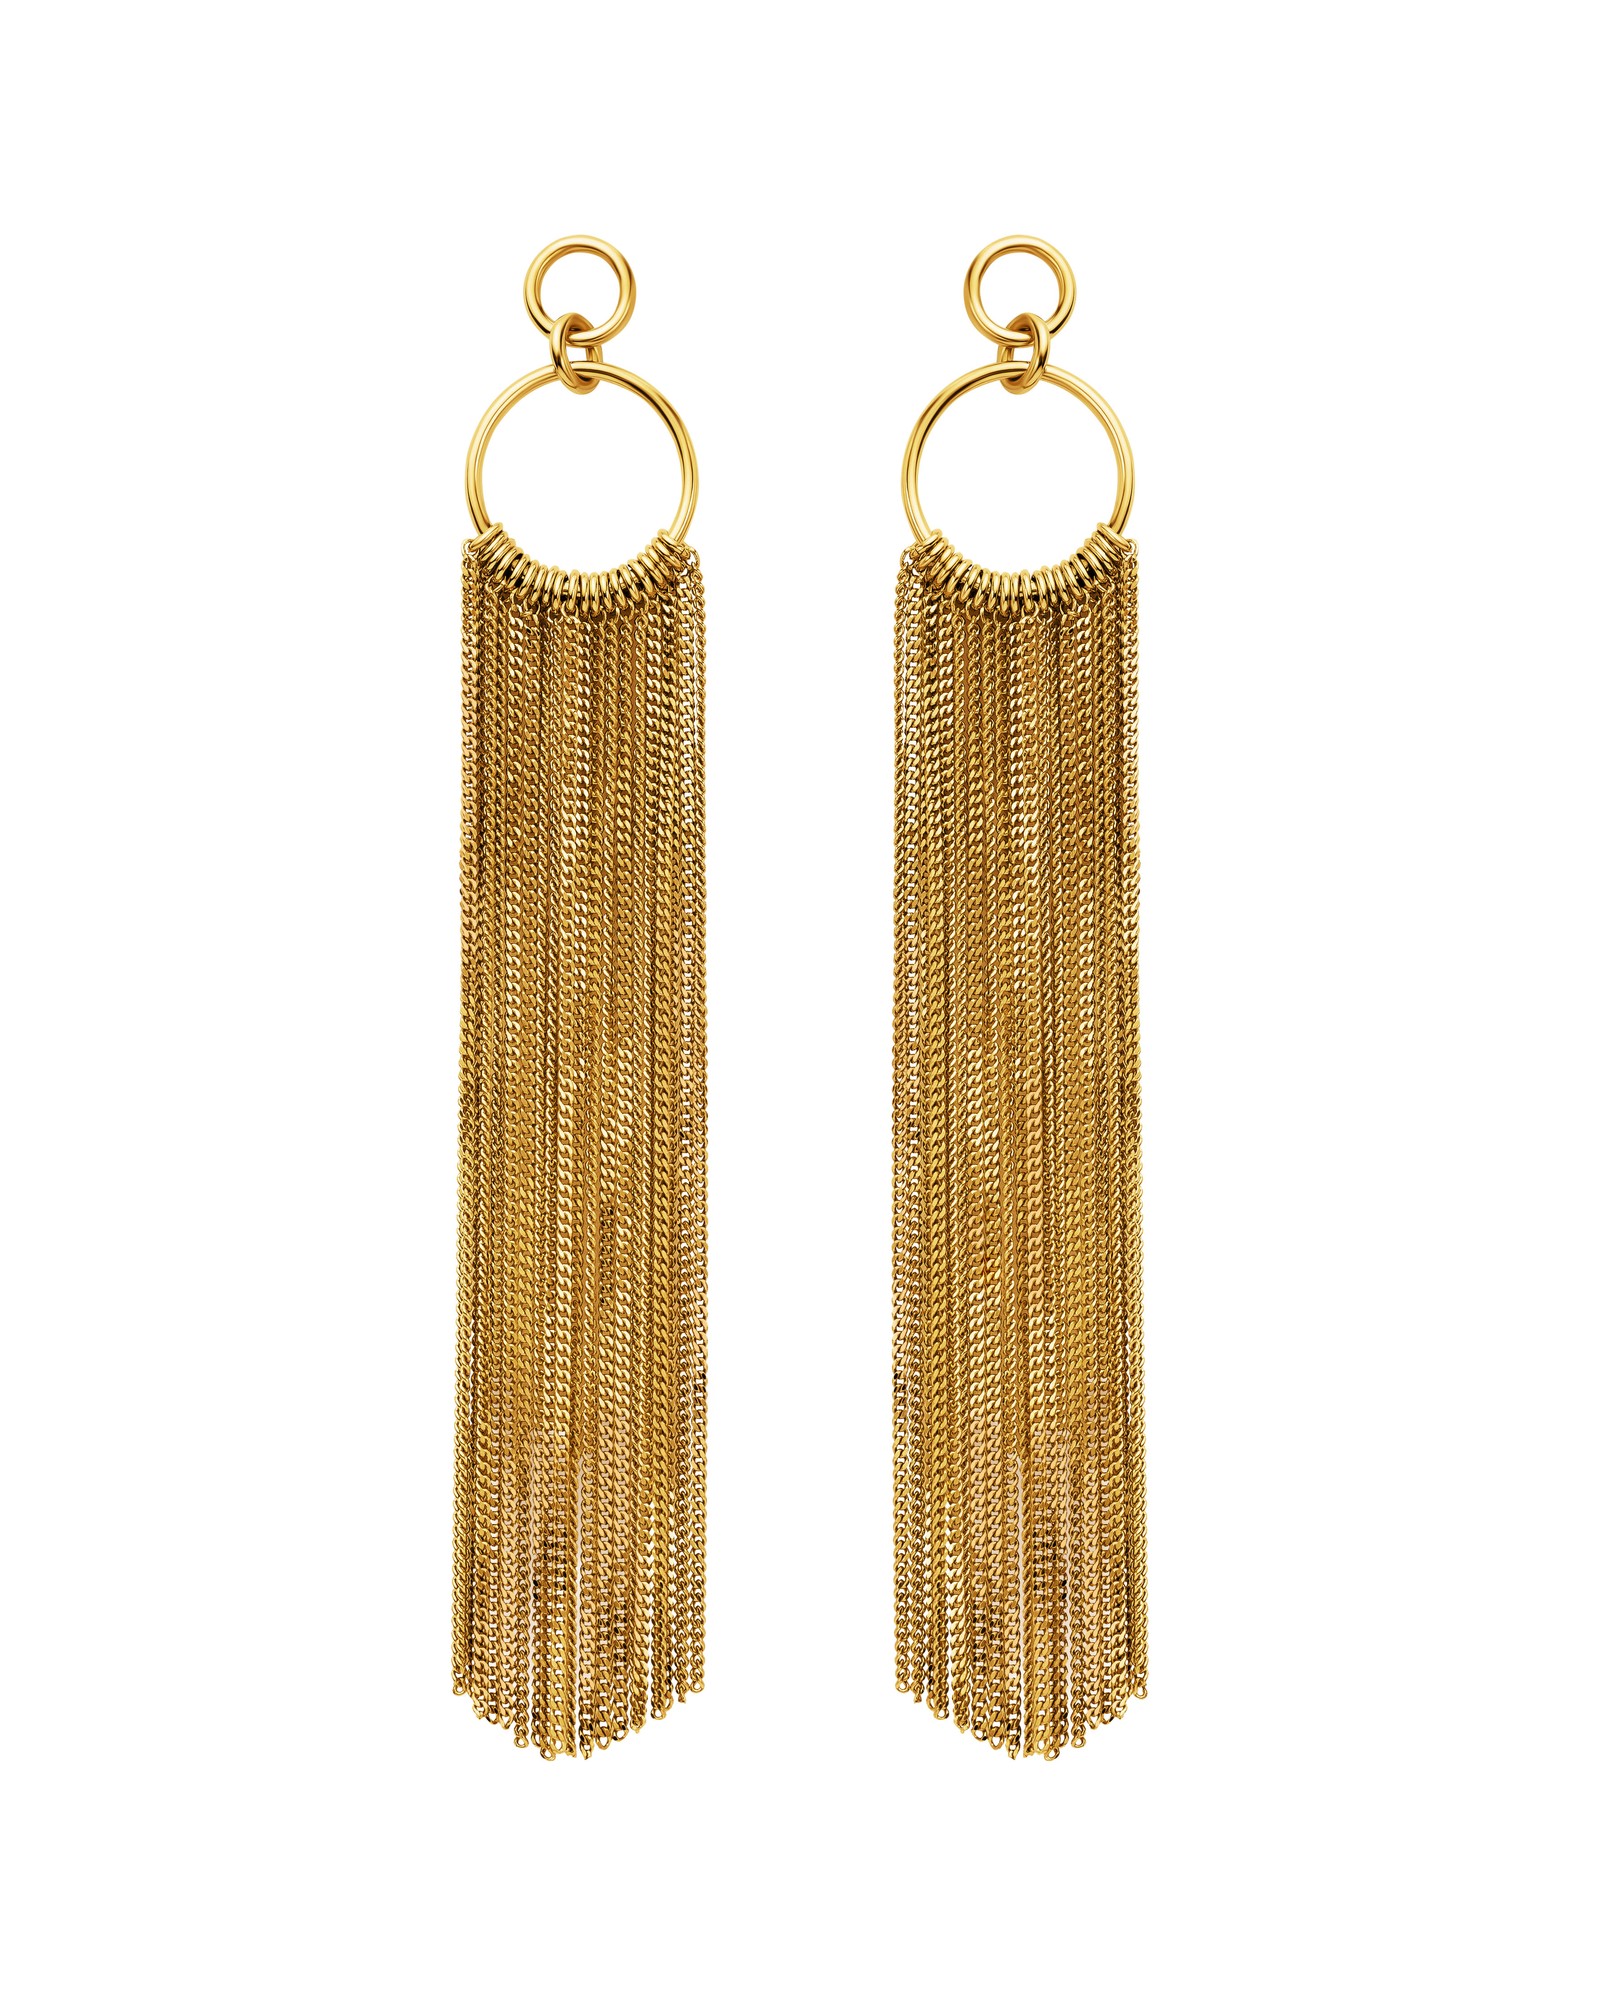 EARRINGS WATERFALL GOLD PLATED STERLING SILVER 925